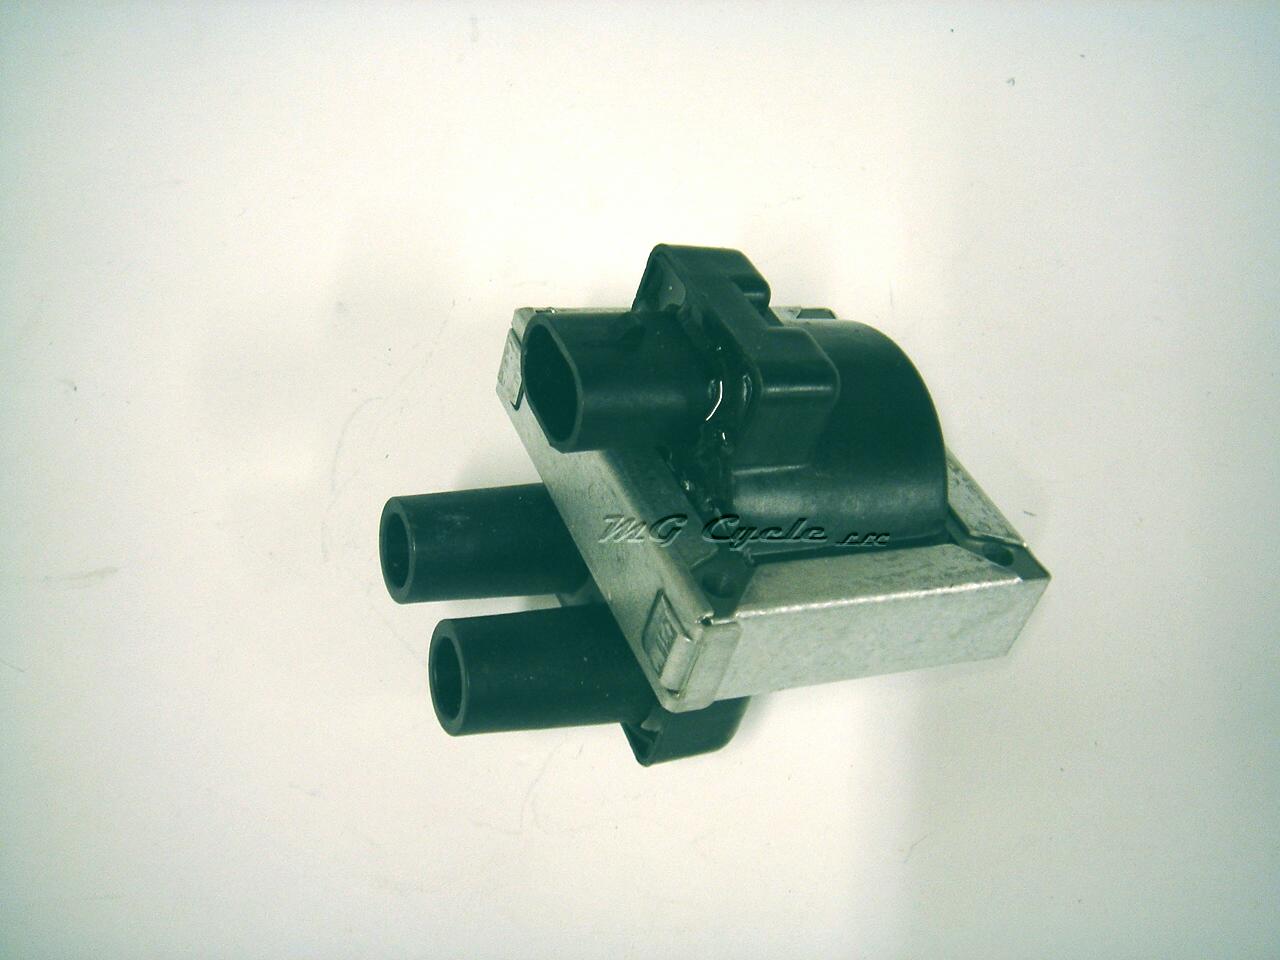 Ignition coil dual plug models 2005-11 Griso Norge Vintage Breva - Click Image to Close